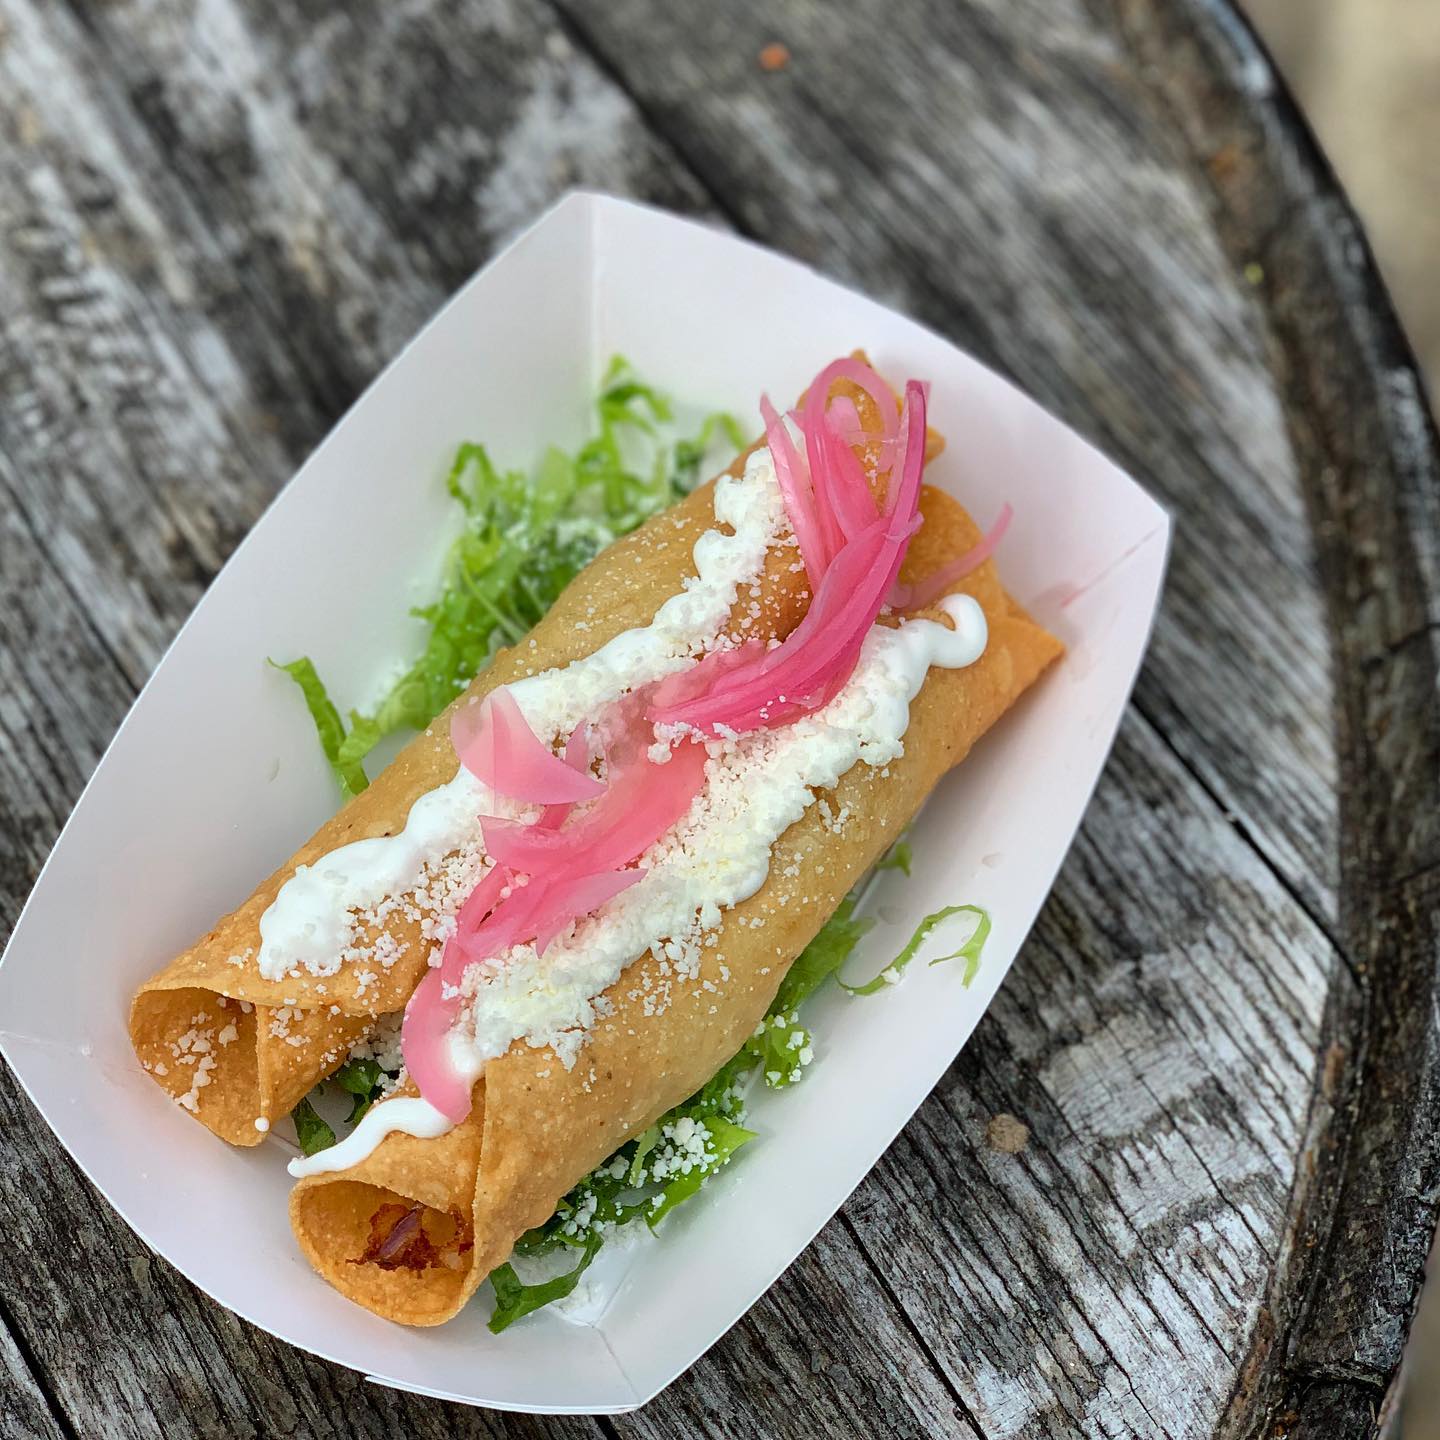 The flautas from Gorditas ATL will be available on the menu at the breakfast and lunch residency on Mondays and Tuesdays at BBQ Cafe in Decatur, GA. 